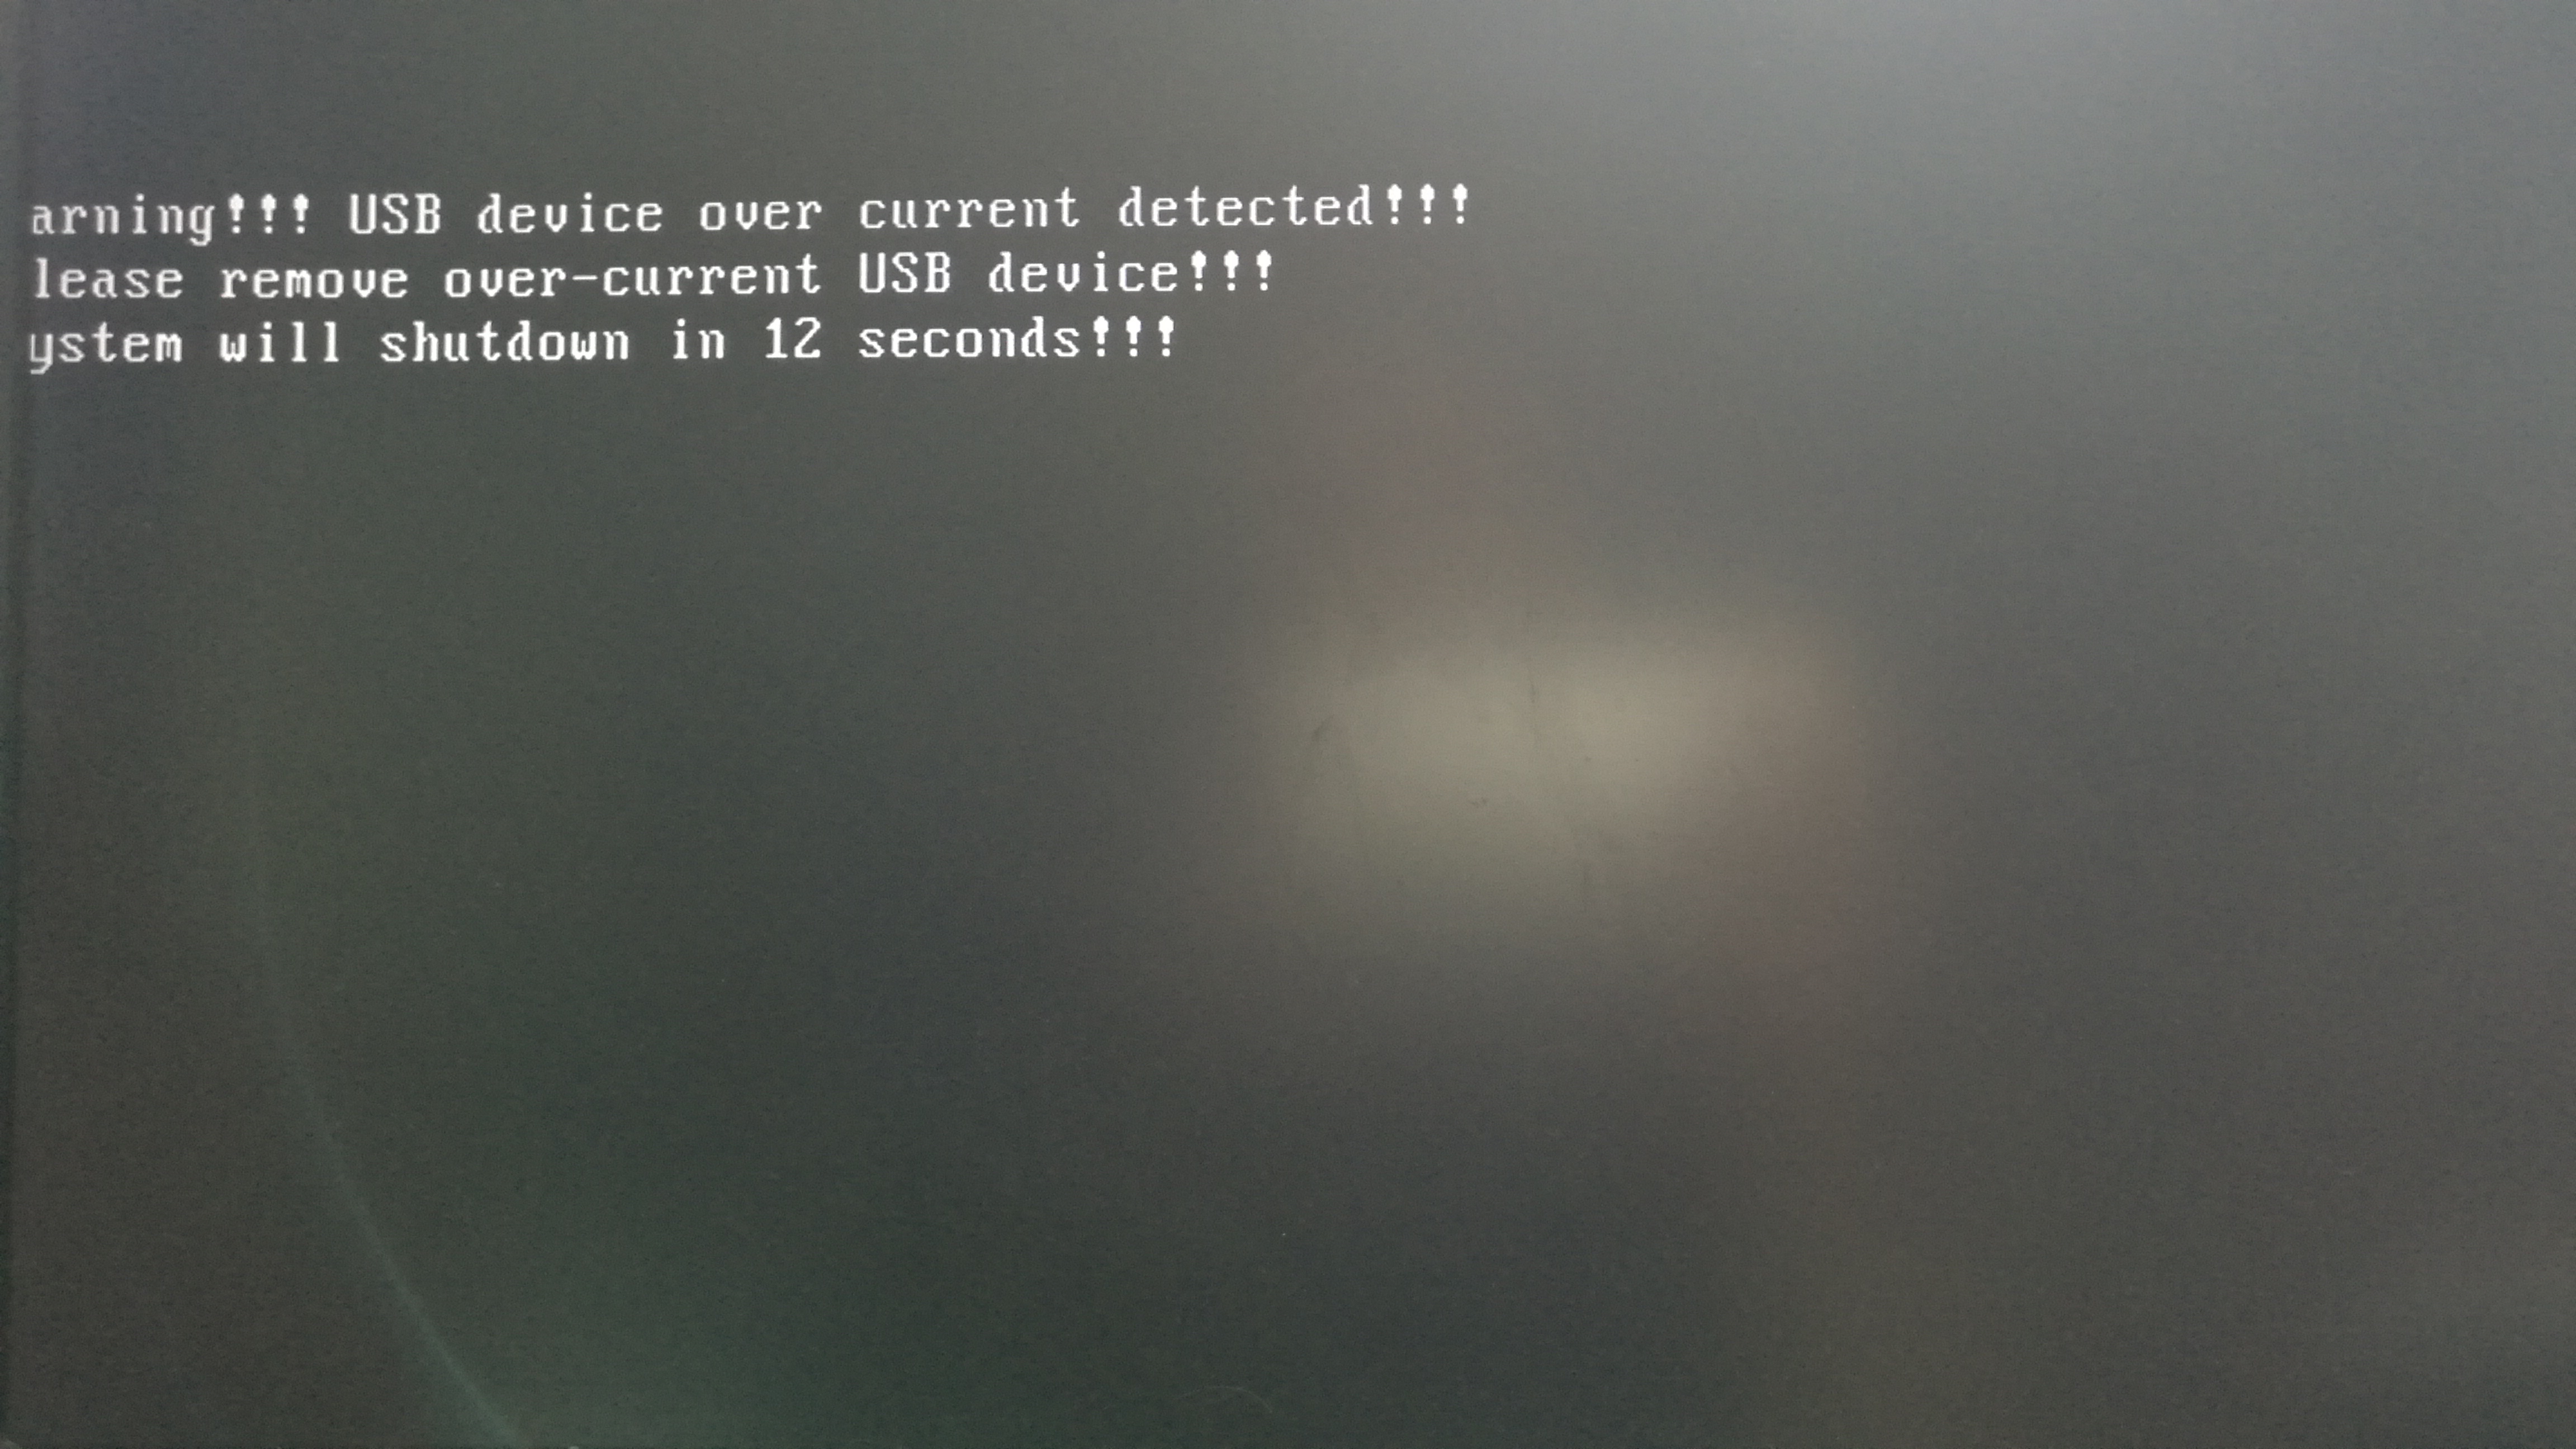 Usb device current status detected. USB device over current status detected.